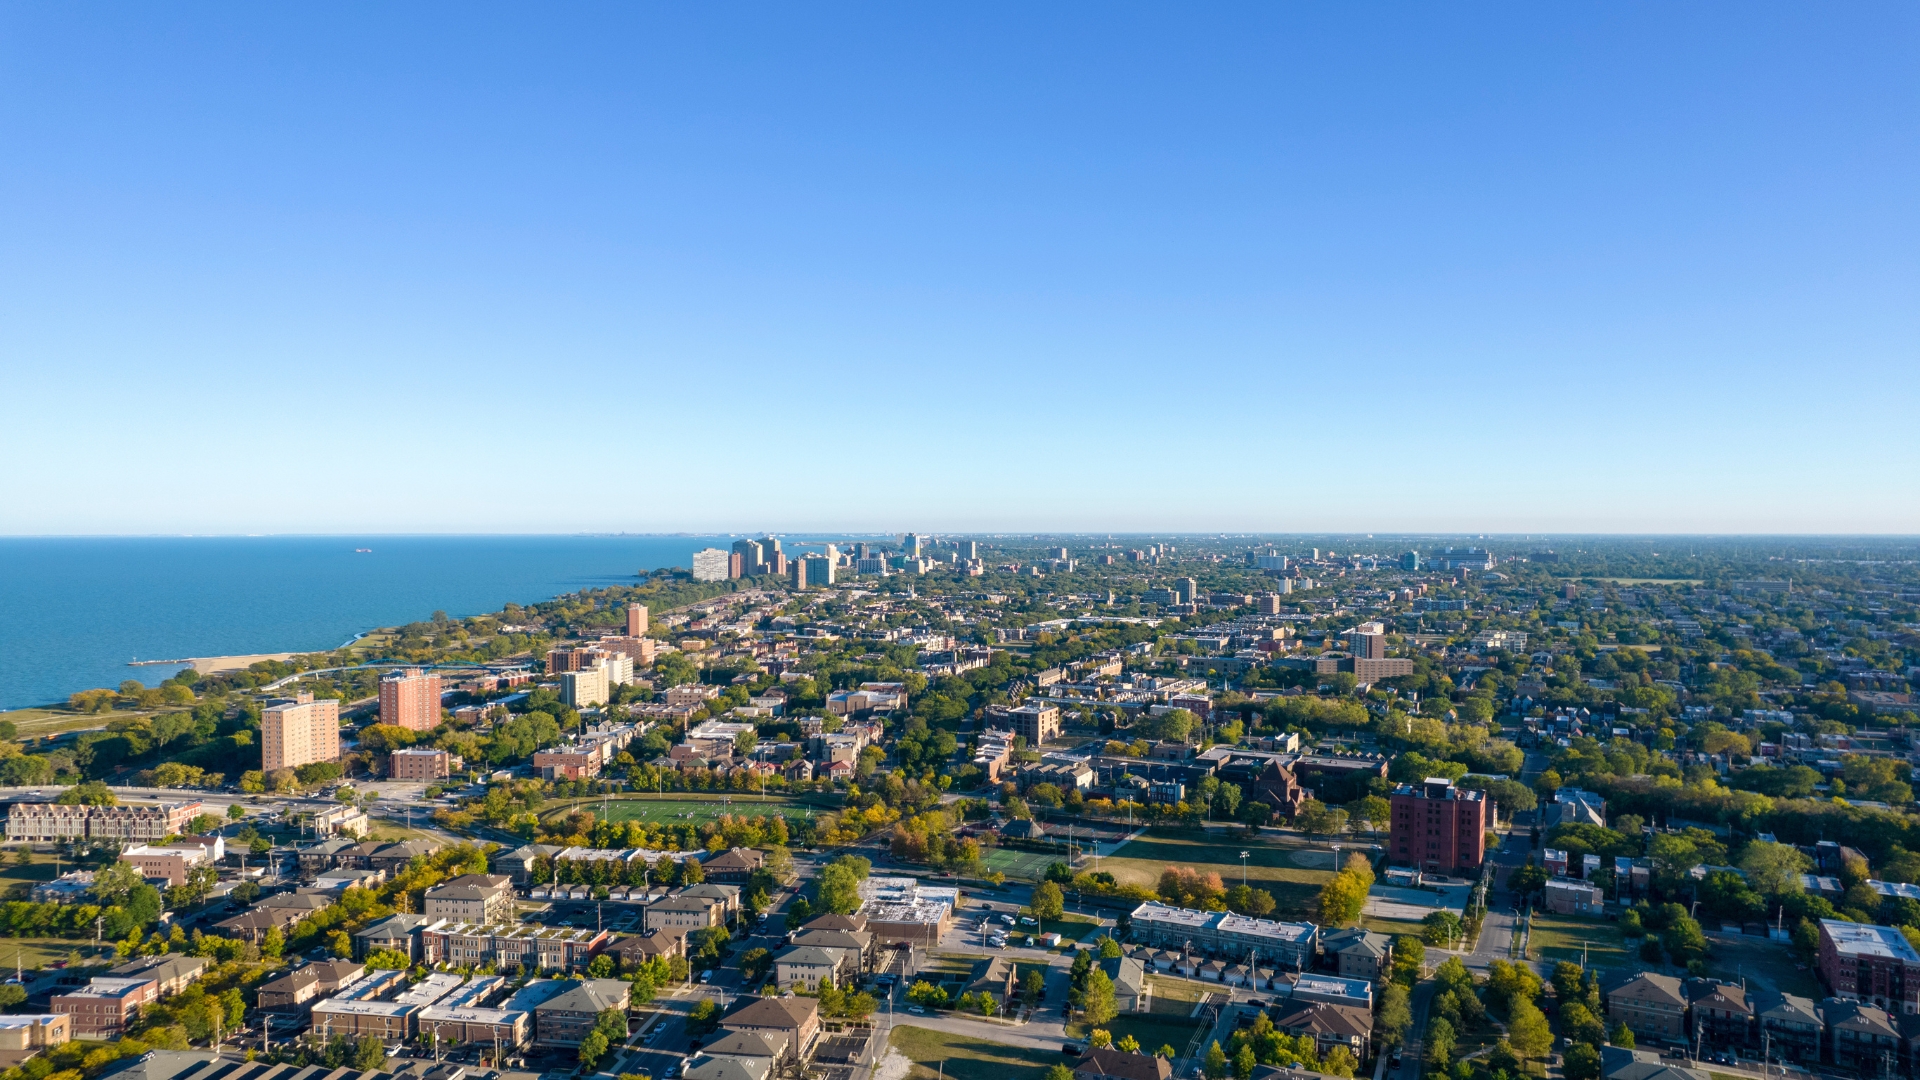 An aerial view image of South Shore with Lake Michigan in the background